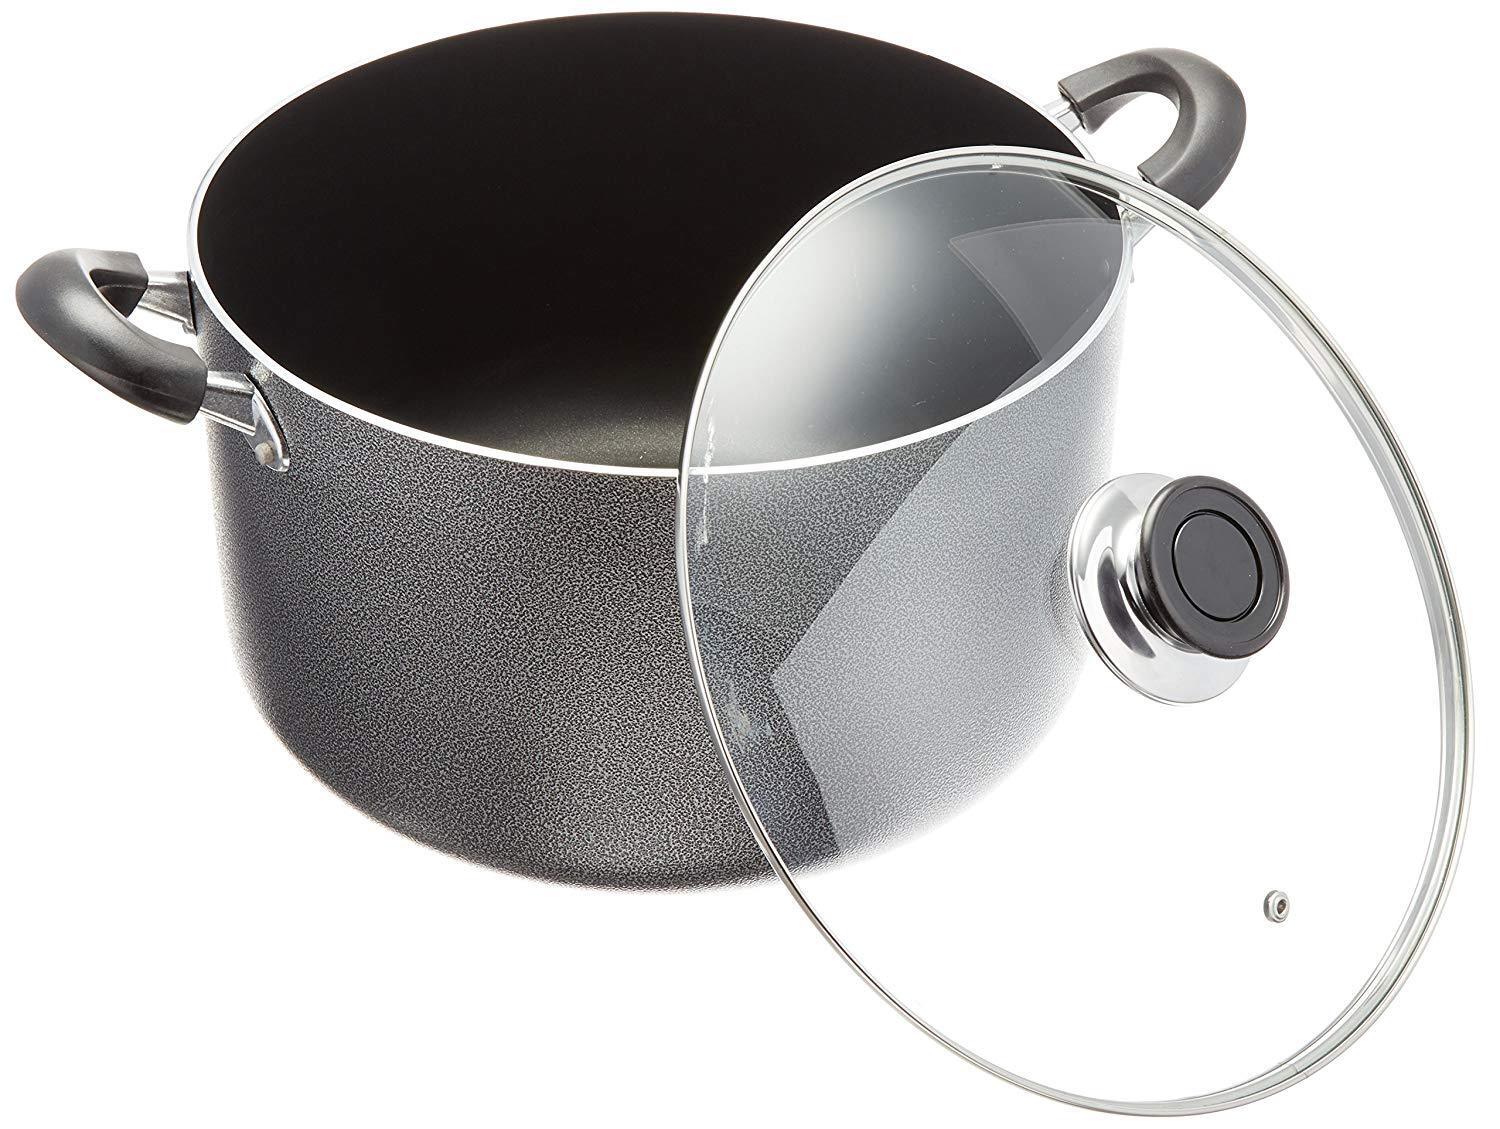 Uniware Stainless Steel Pot with Glass Lid (2 QT) Silver/Black